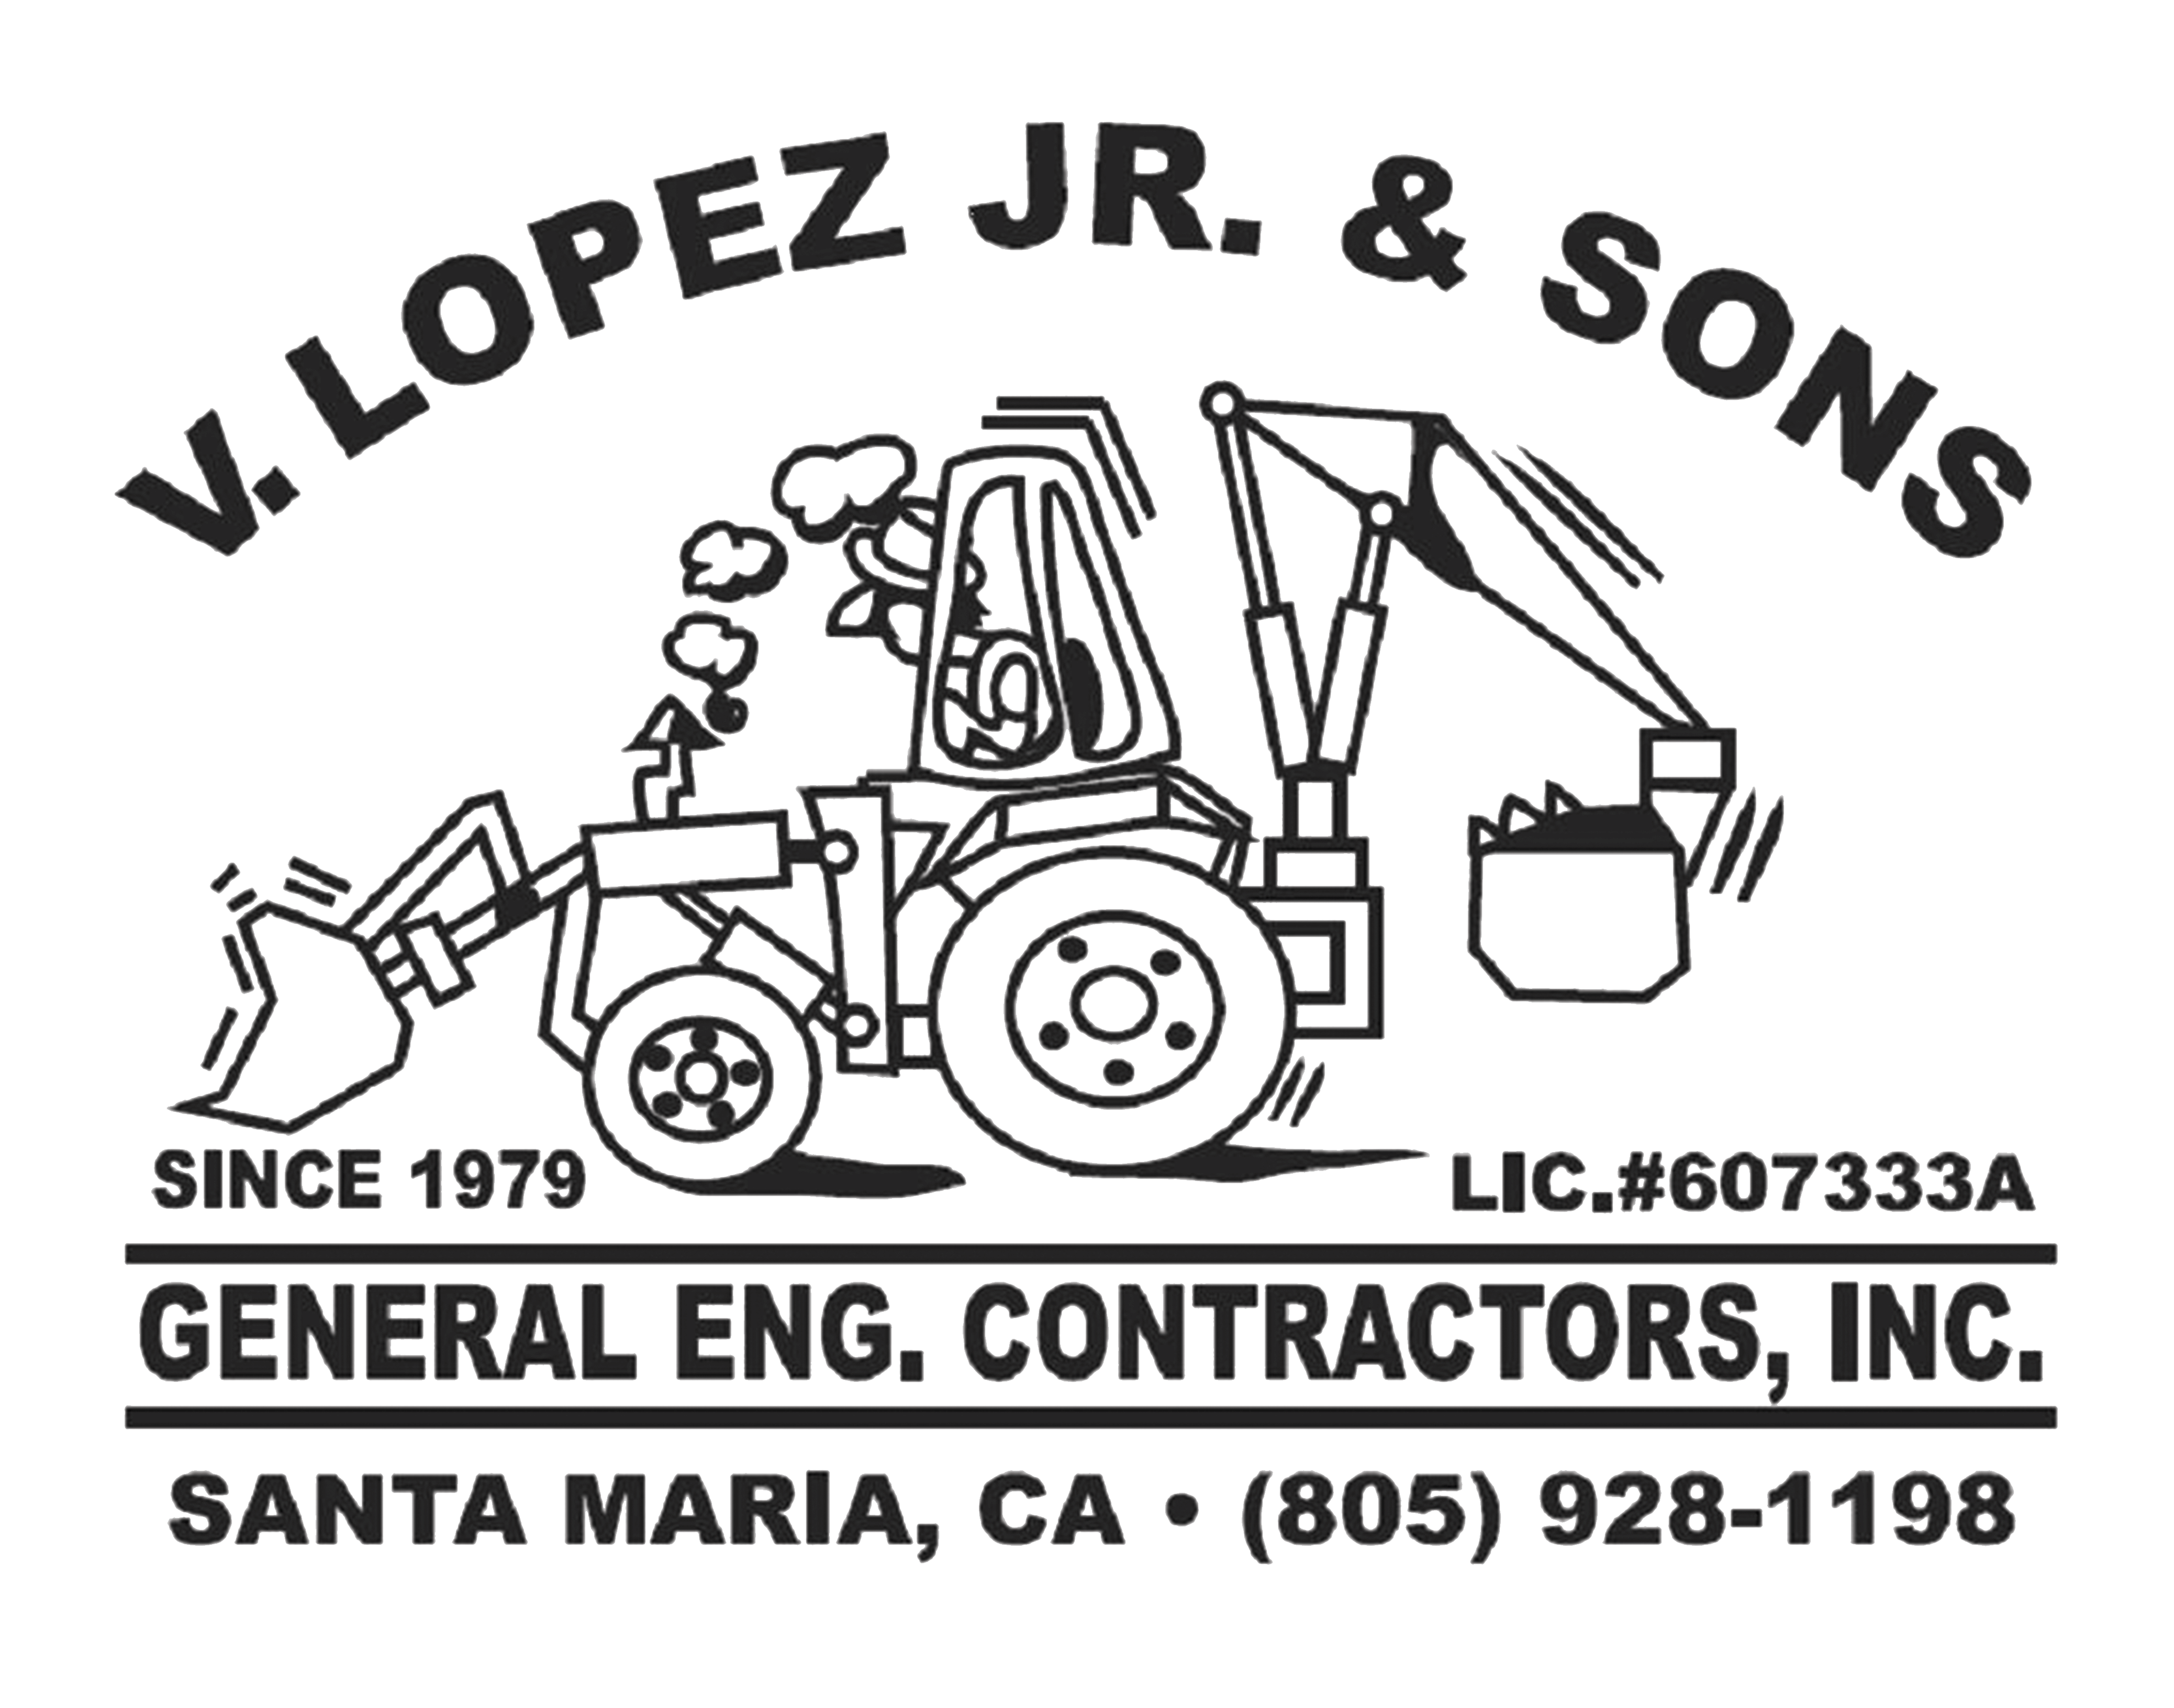 V Lopez and sons contracting